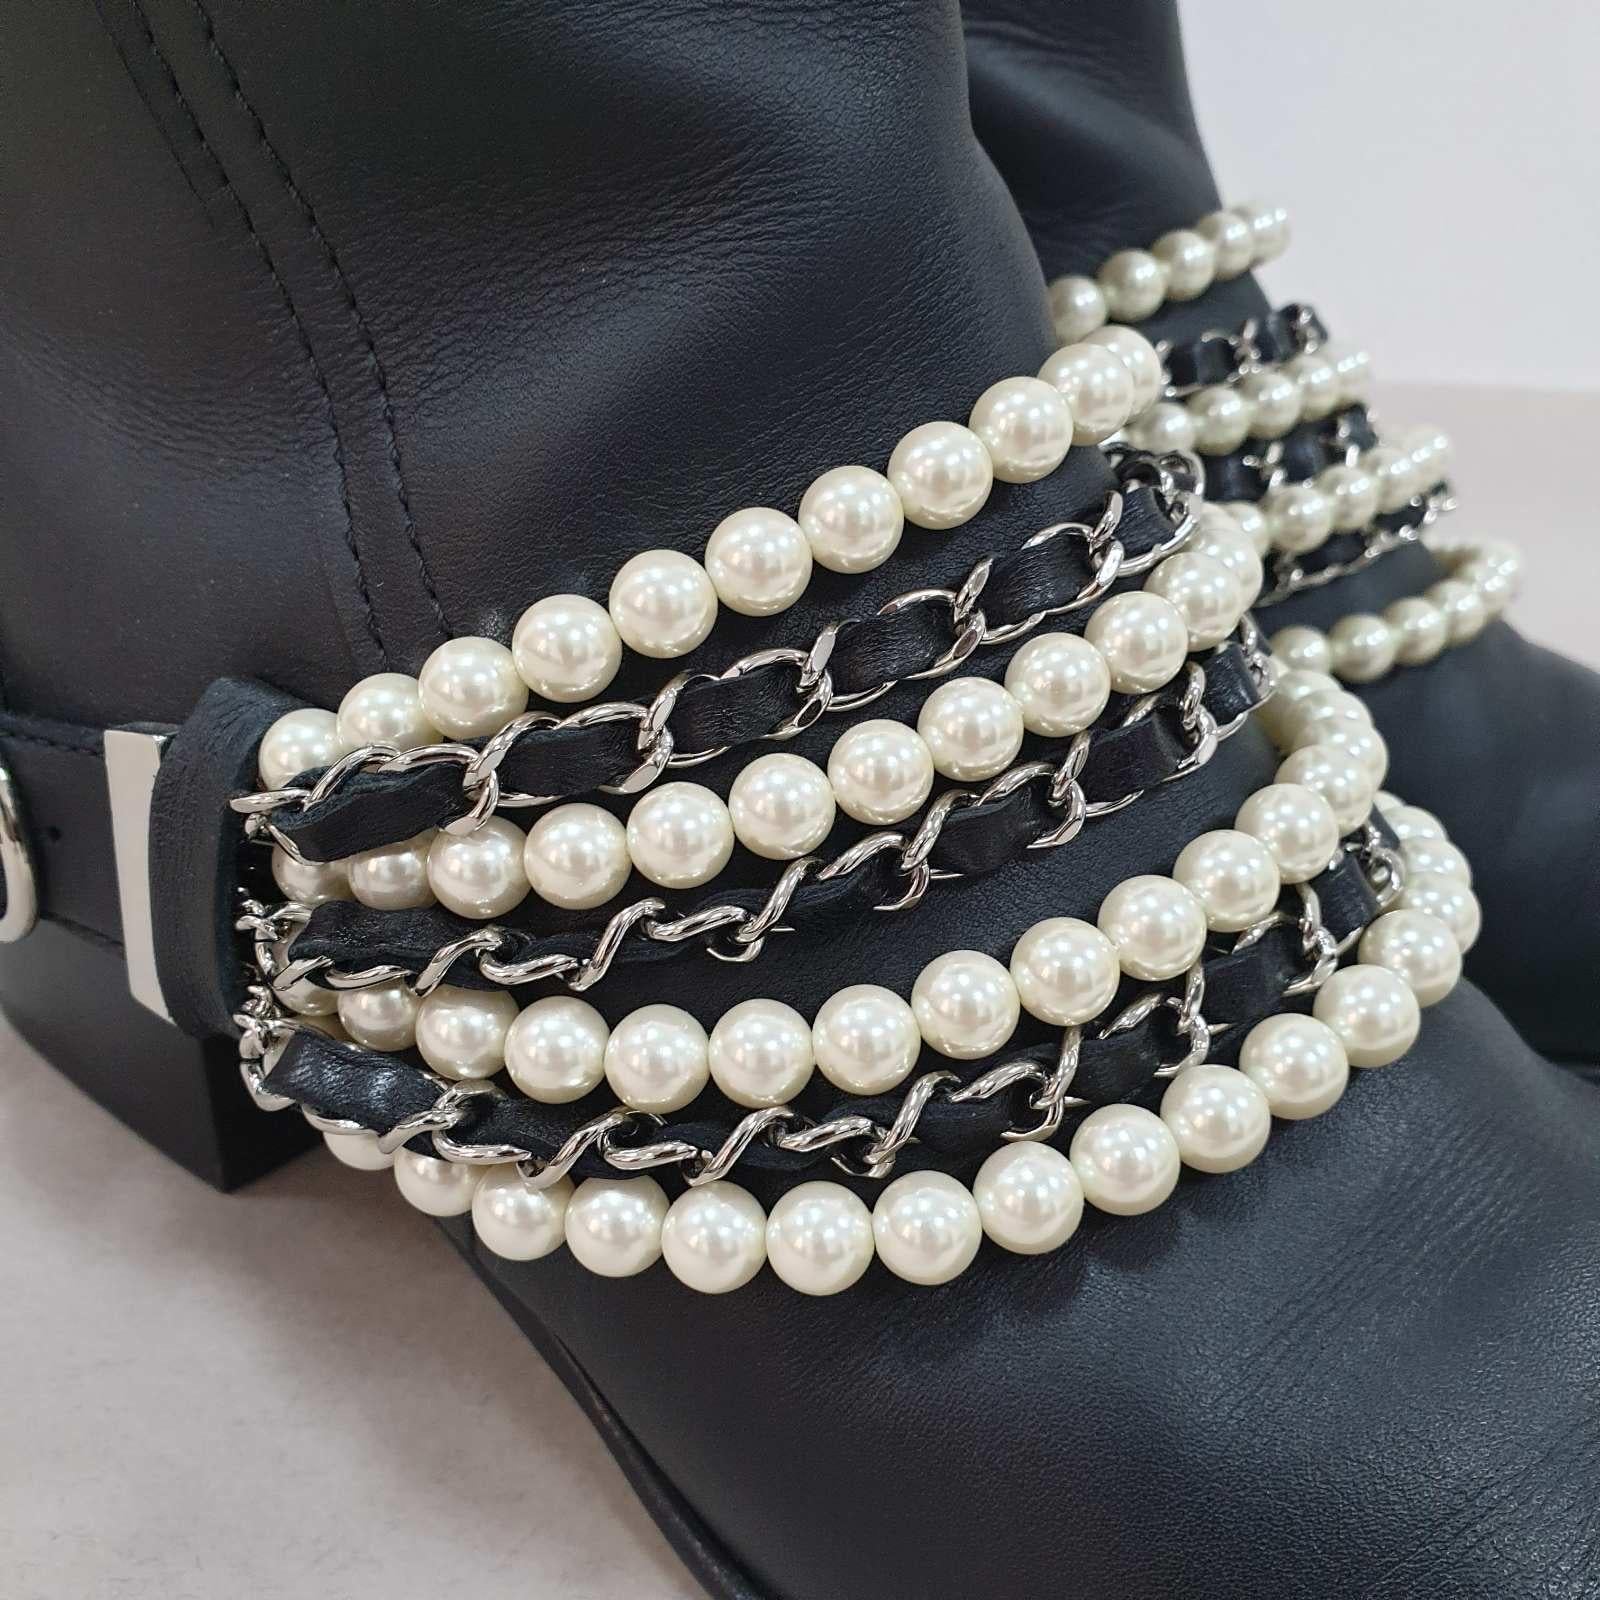 Creations as fashionable as this pair of knee-length boots from Chanel deserve to be in every woman's closet. 
These designer boots have been created using black leather and highlighted with layers of faux pearls and woven chains on the